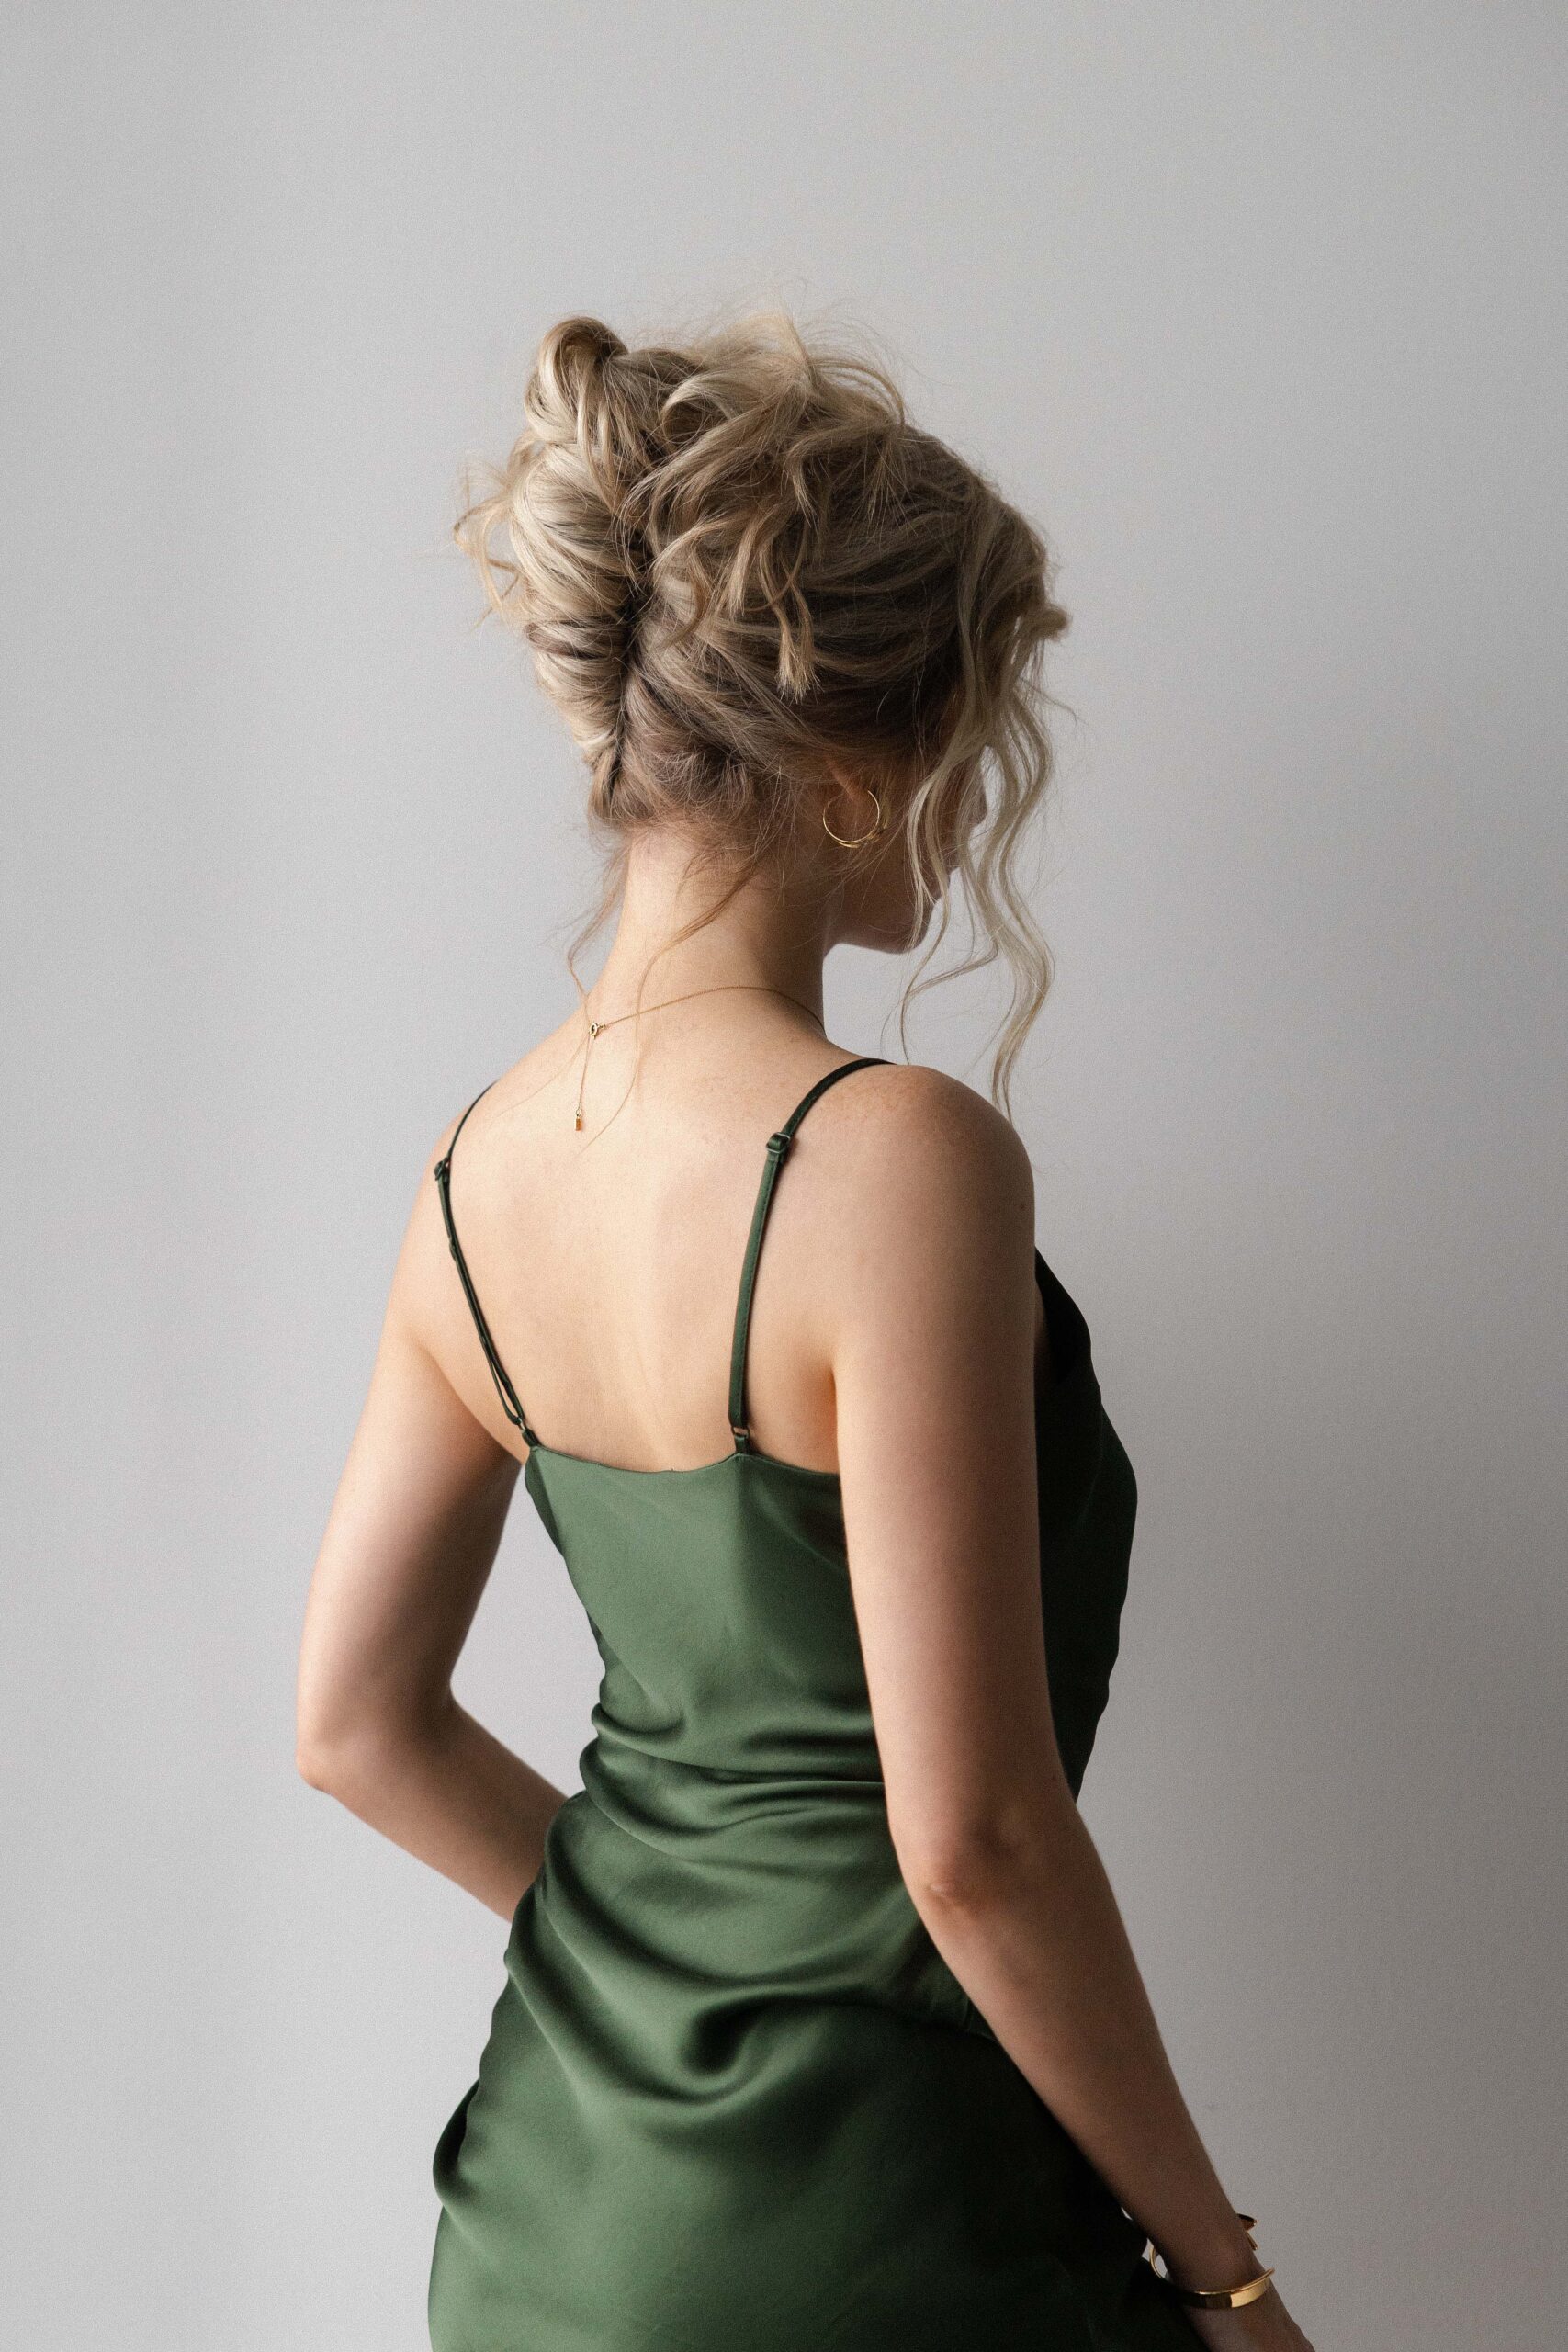 Effortless Prom Hair Looks to Try This
Season